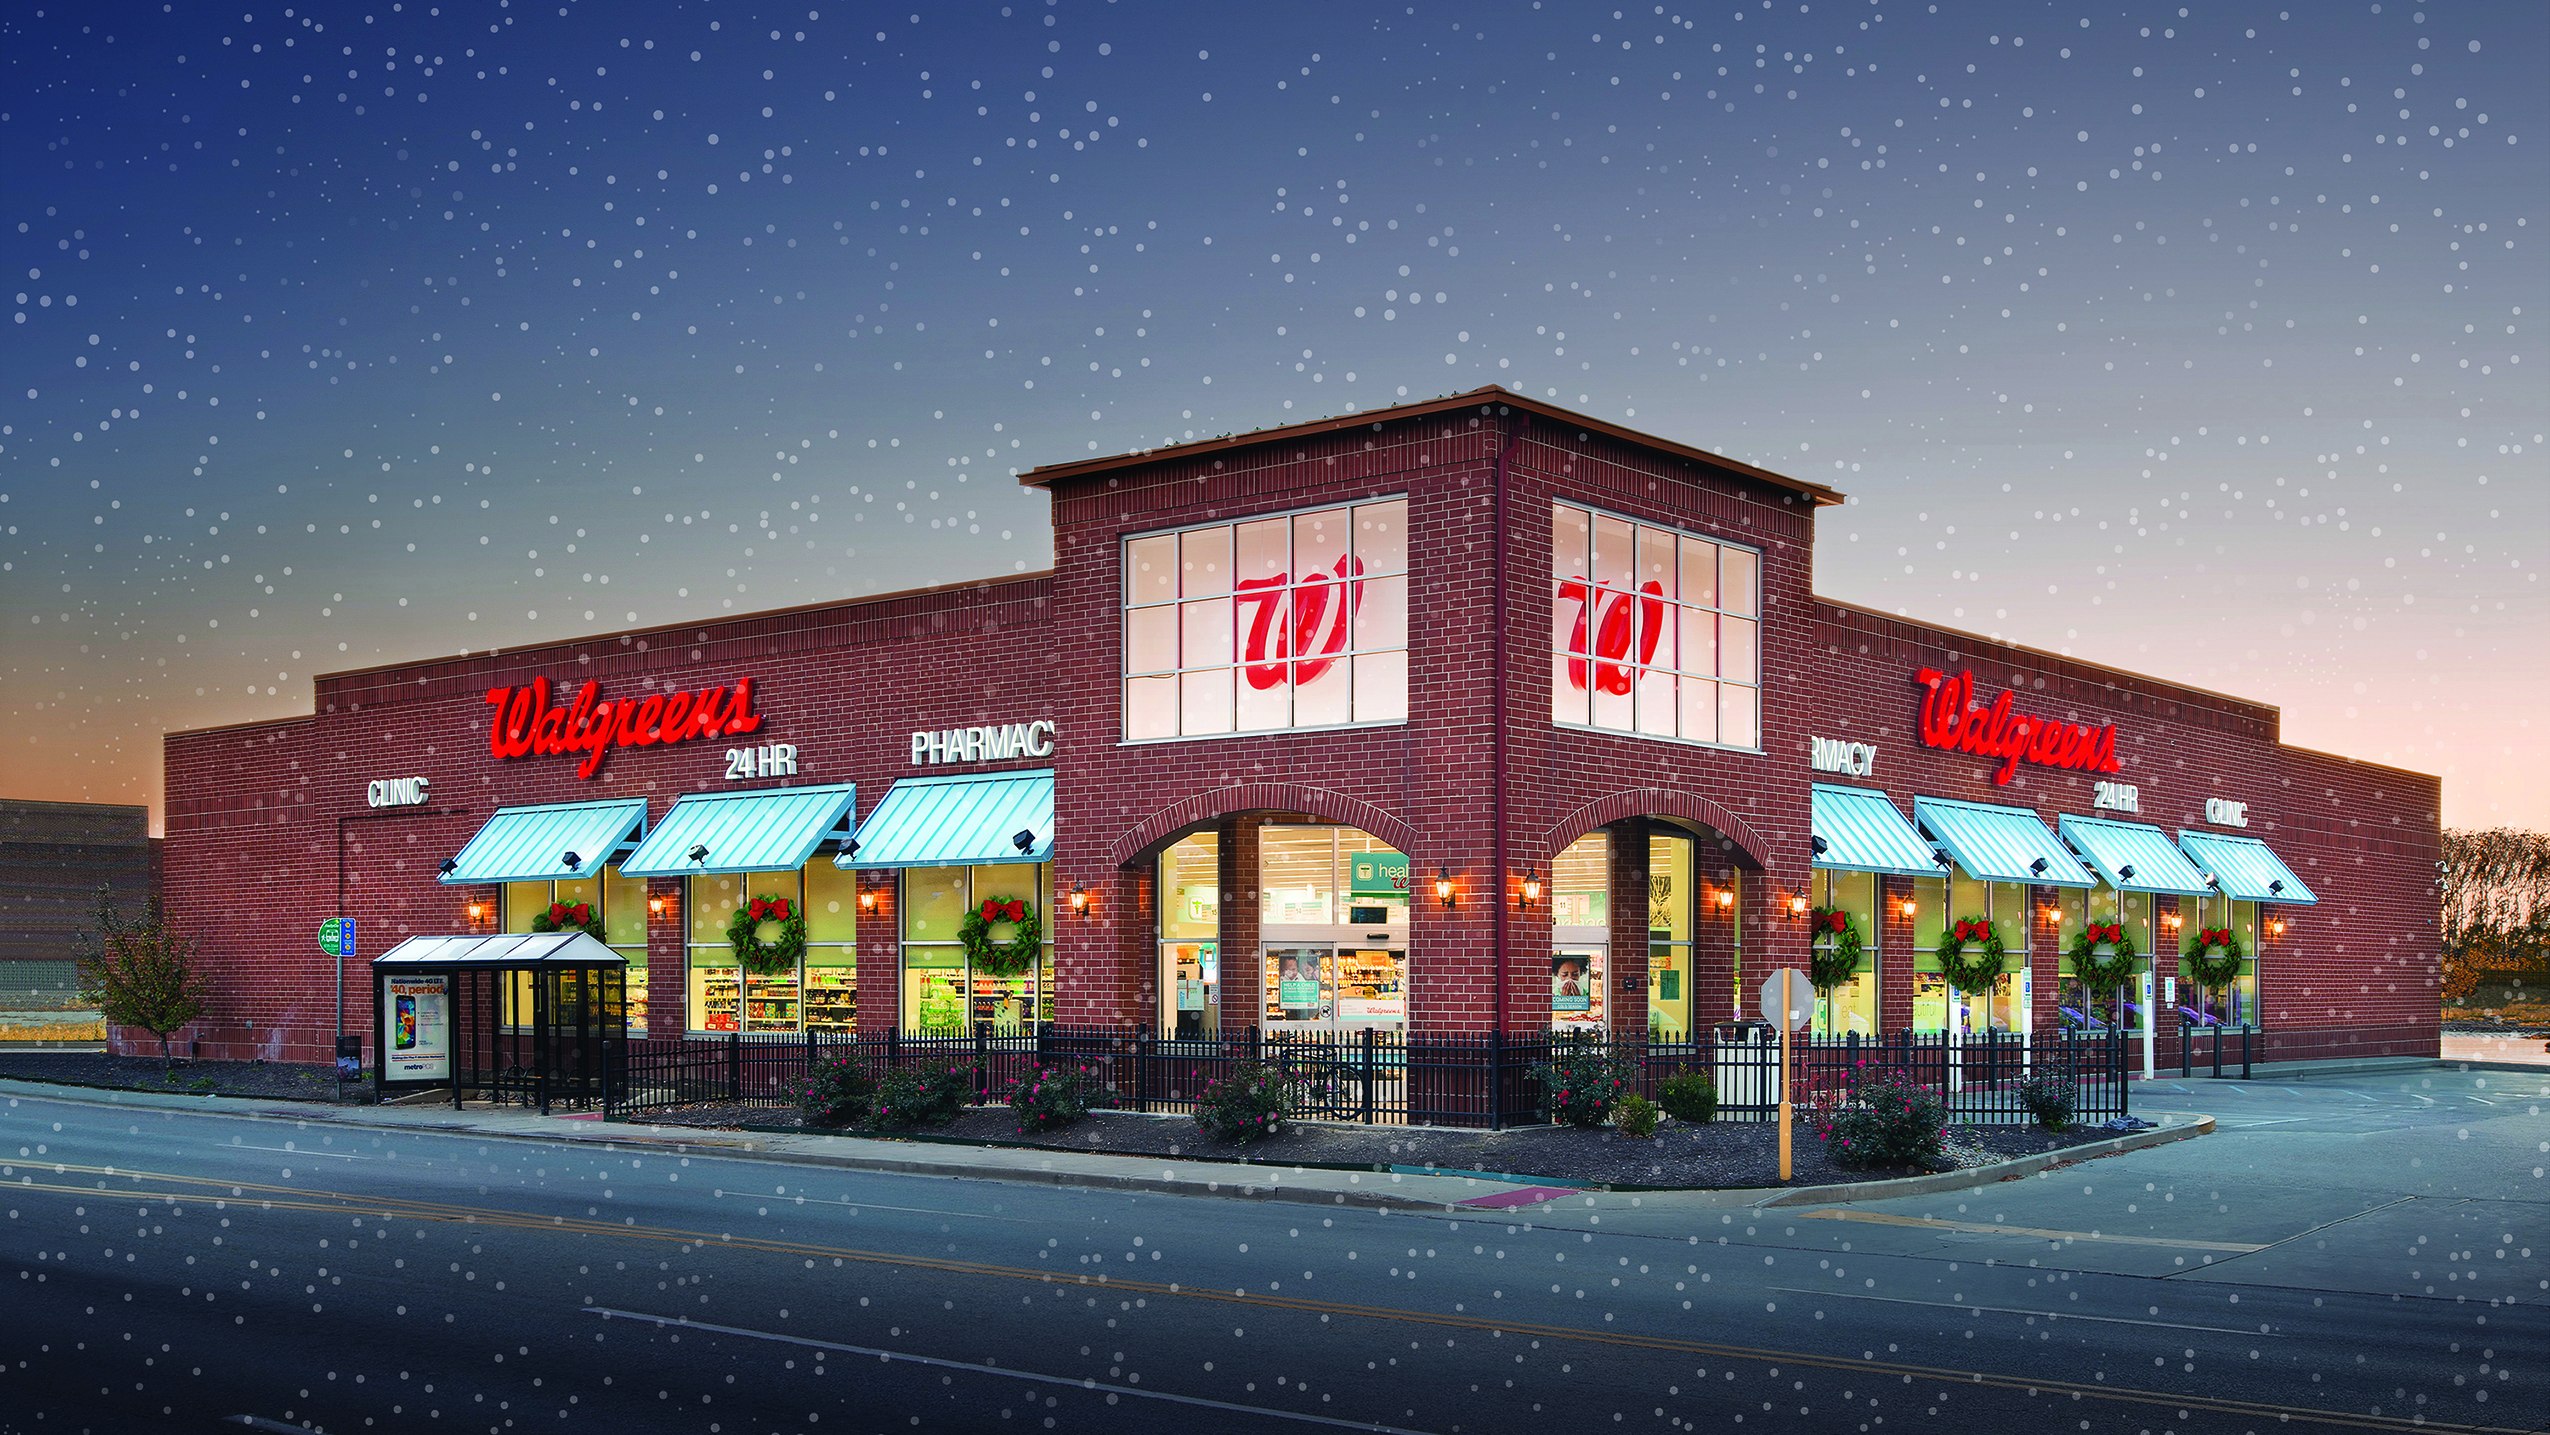 Walgreens in snow